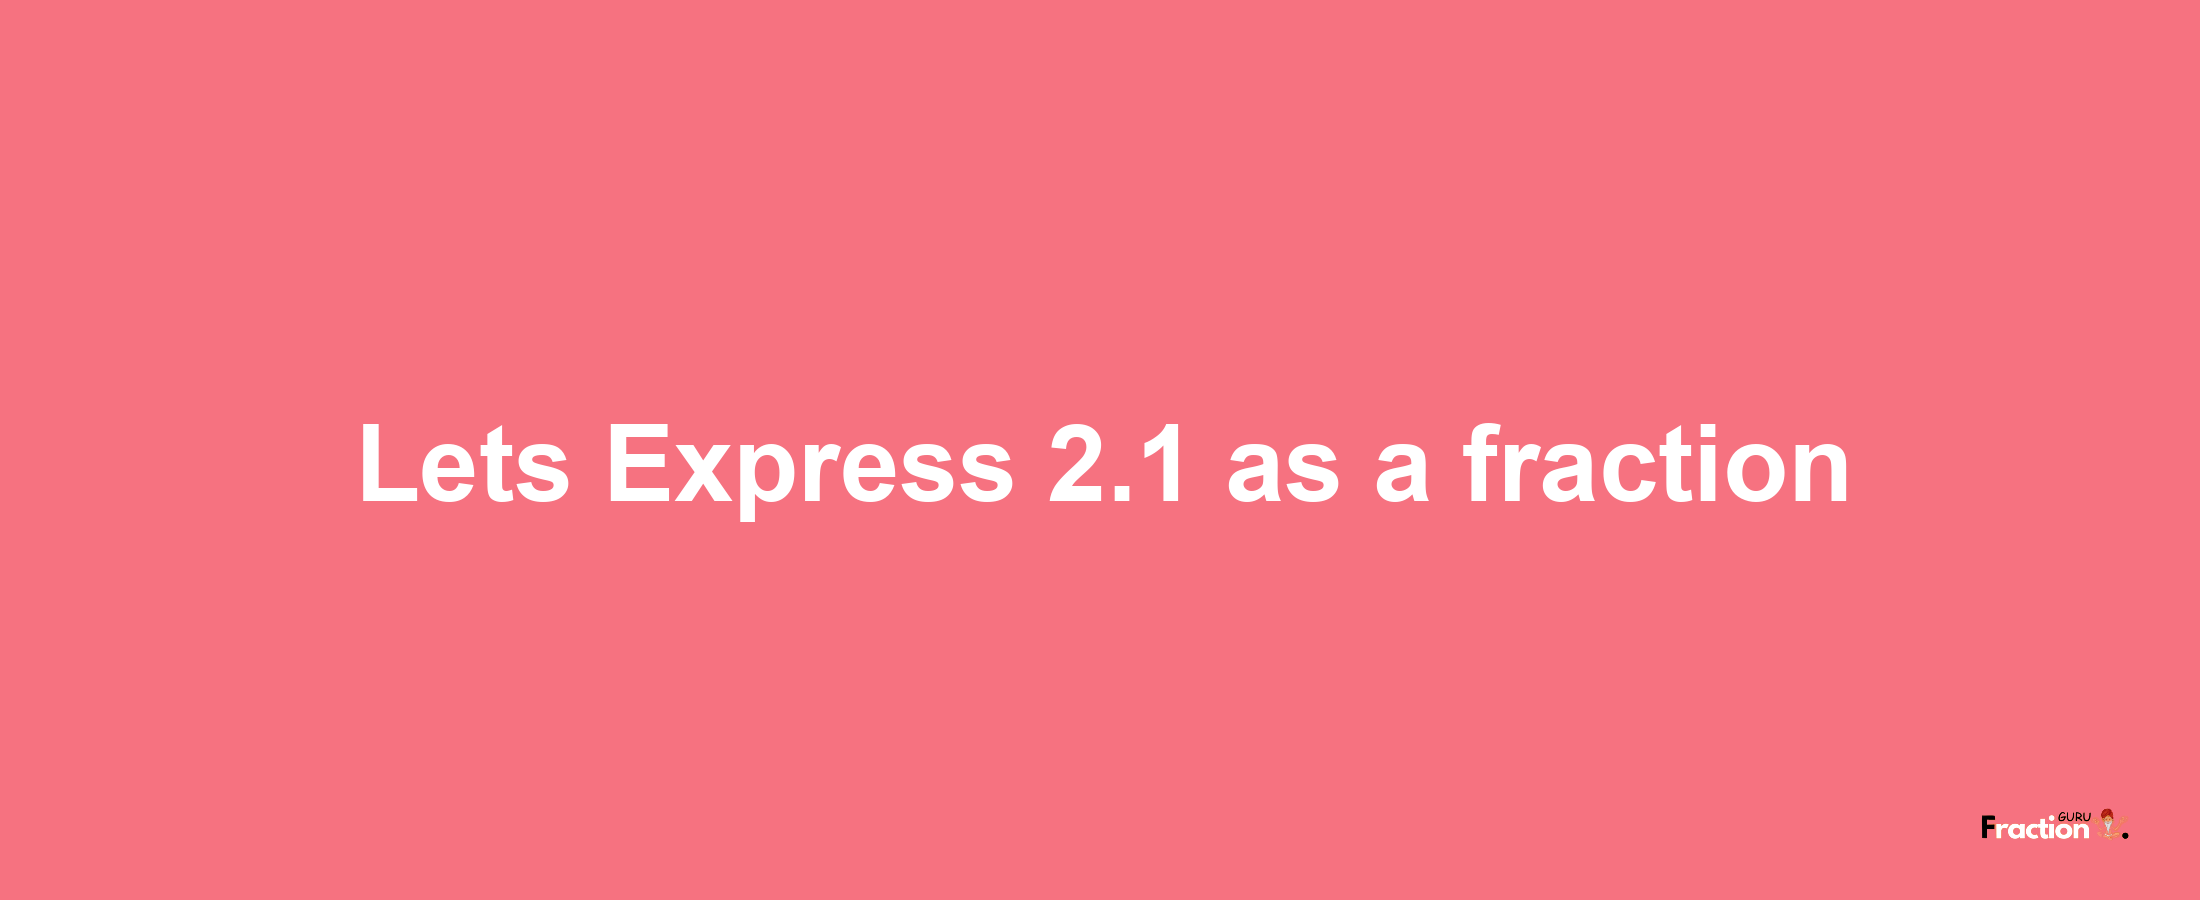 Lets Express 2.1 as afraction